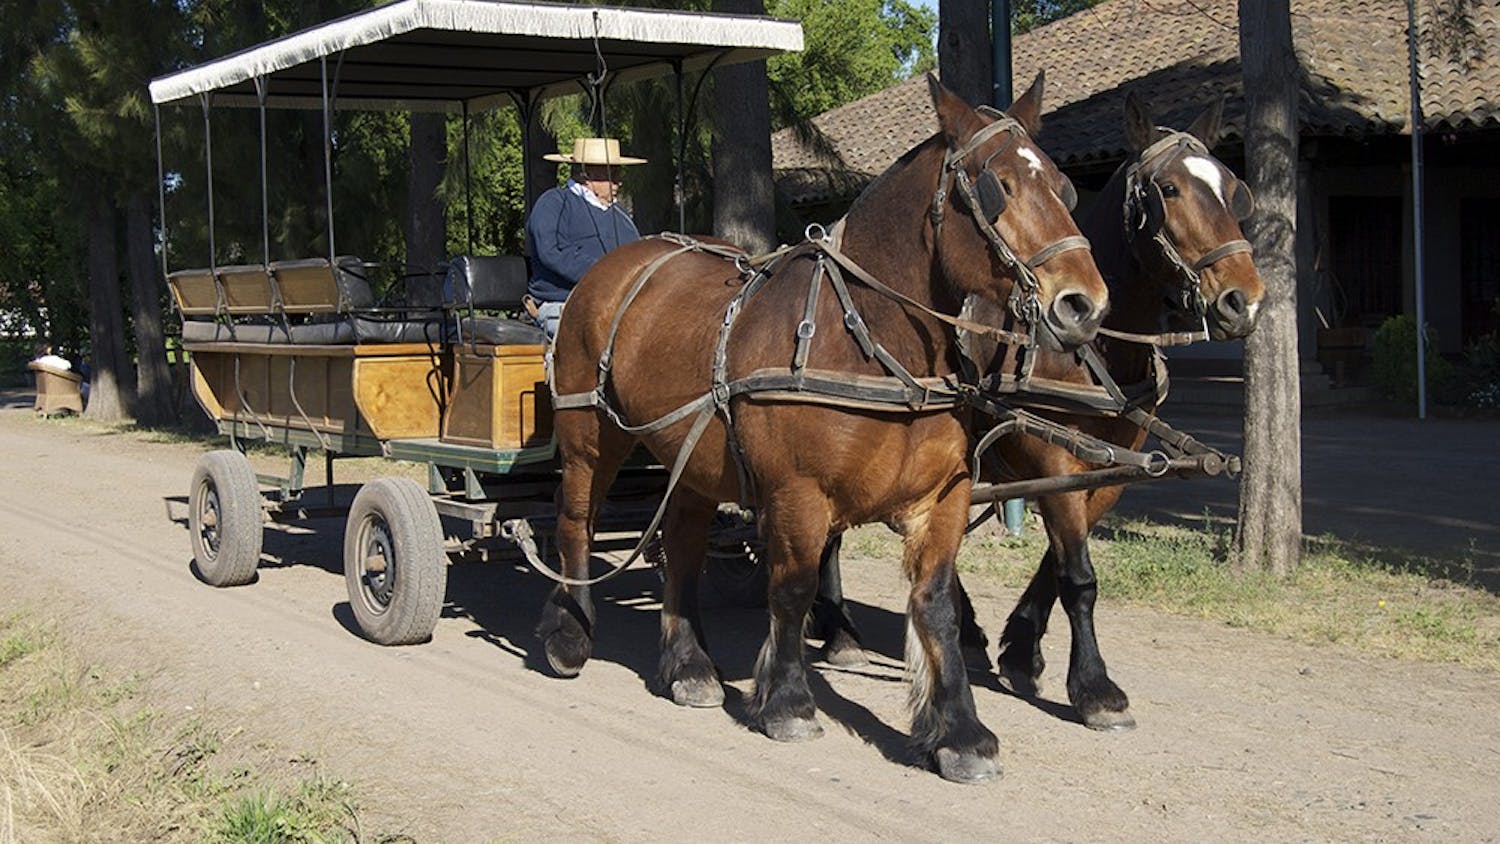 he winery provides horse-drawn carriage tours, allowing visitors to relax and enjoy the warm air and refreshing scents around the vineyard.